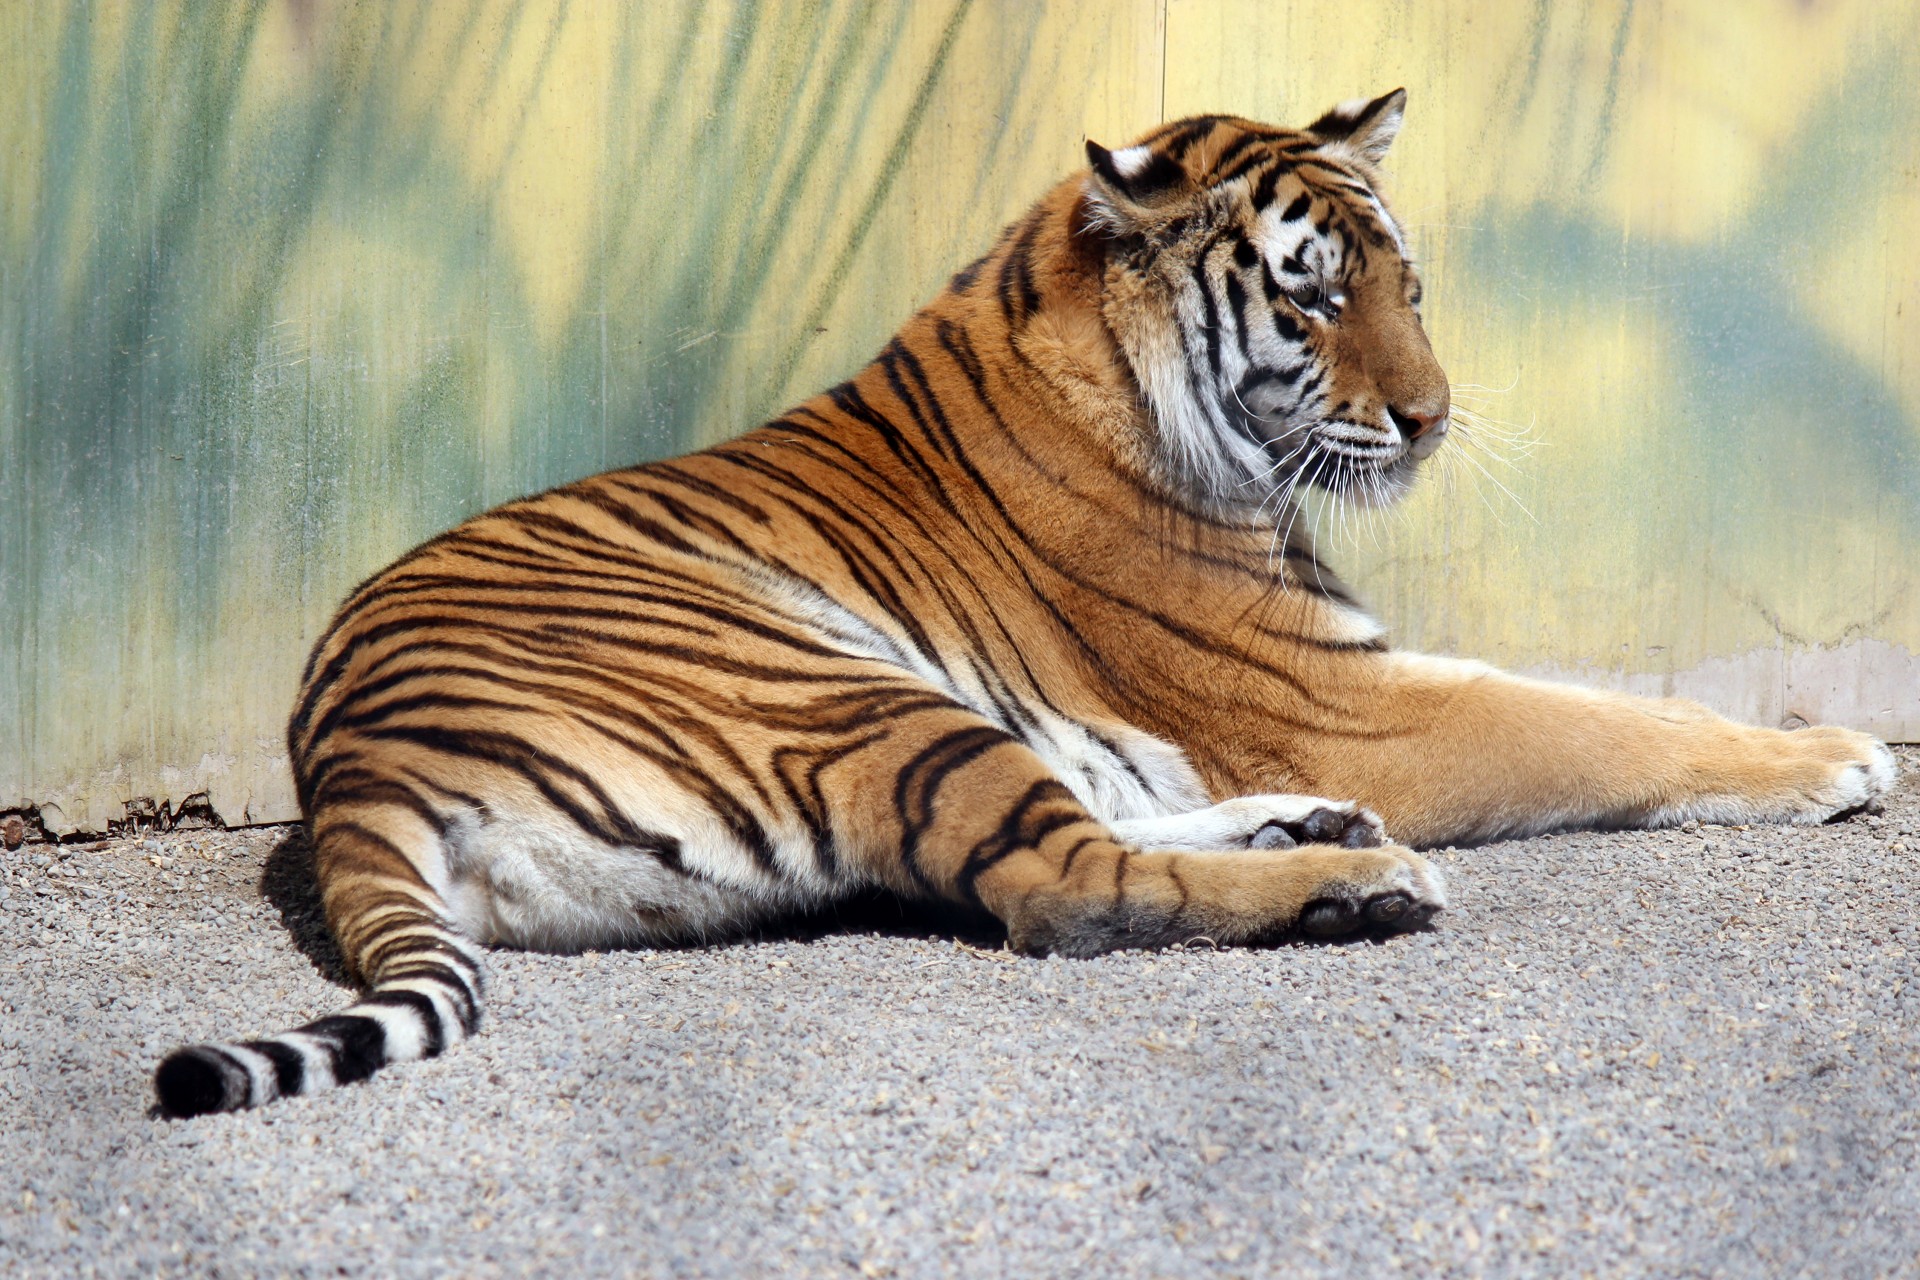 Tiger at rest at Cat Tales Zoological Park in Spokane, Washington.